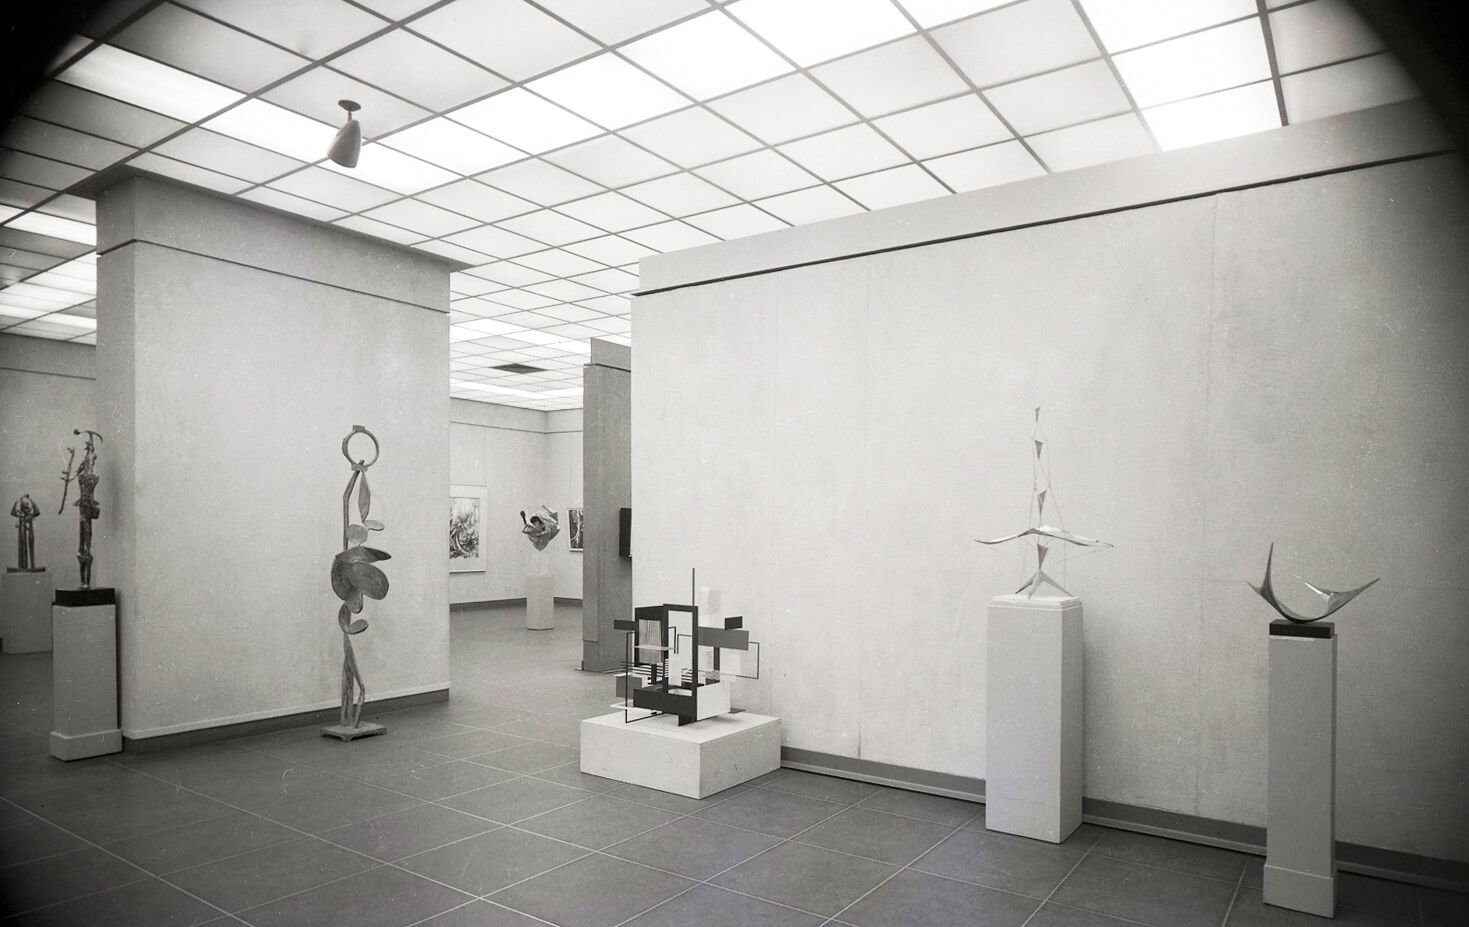 Black-and-white photograph of a gallery of sculptures.